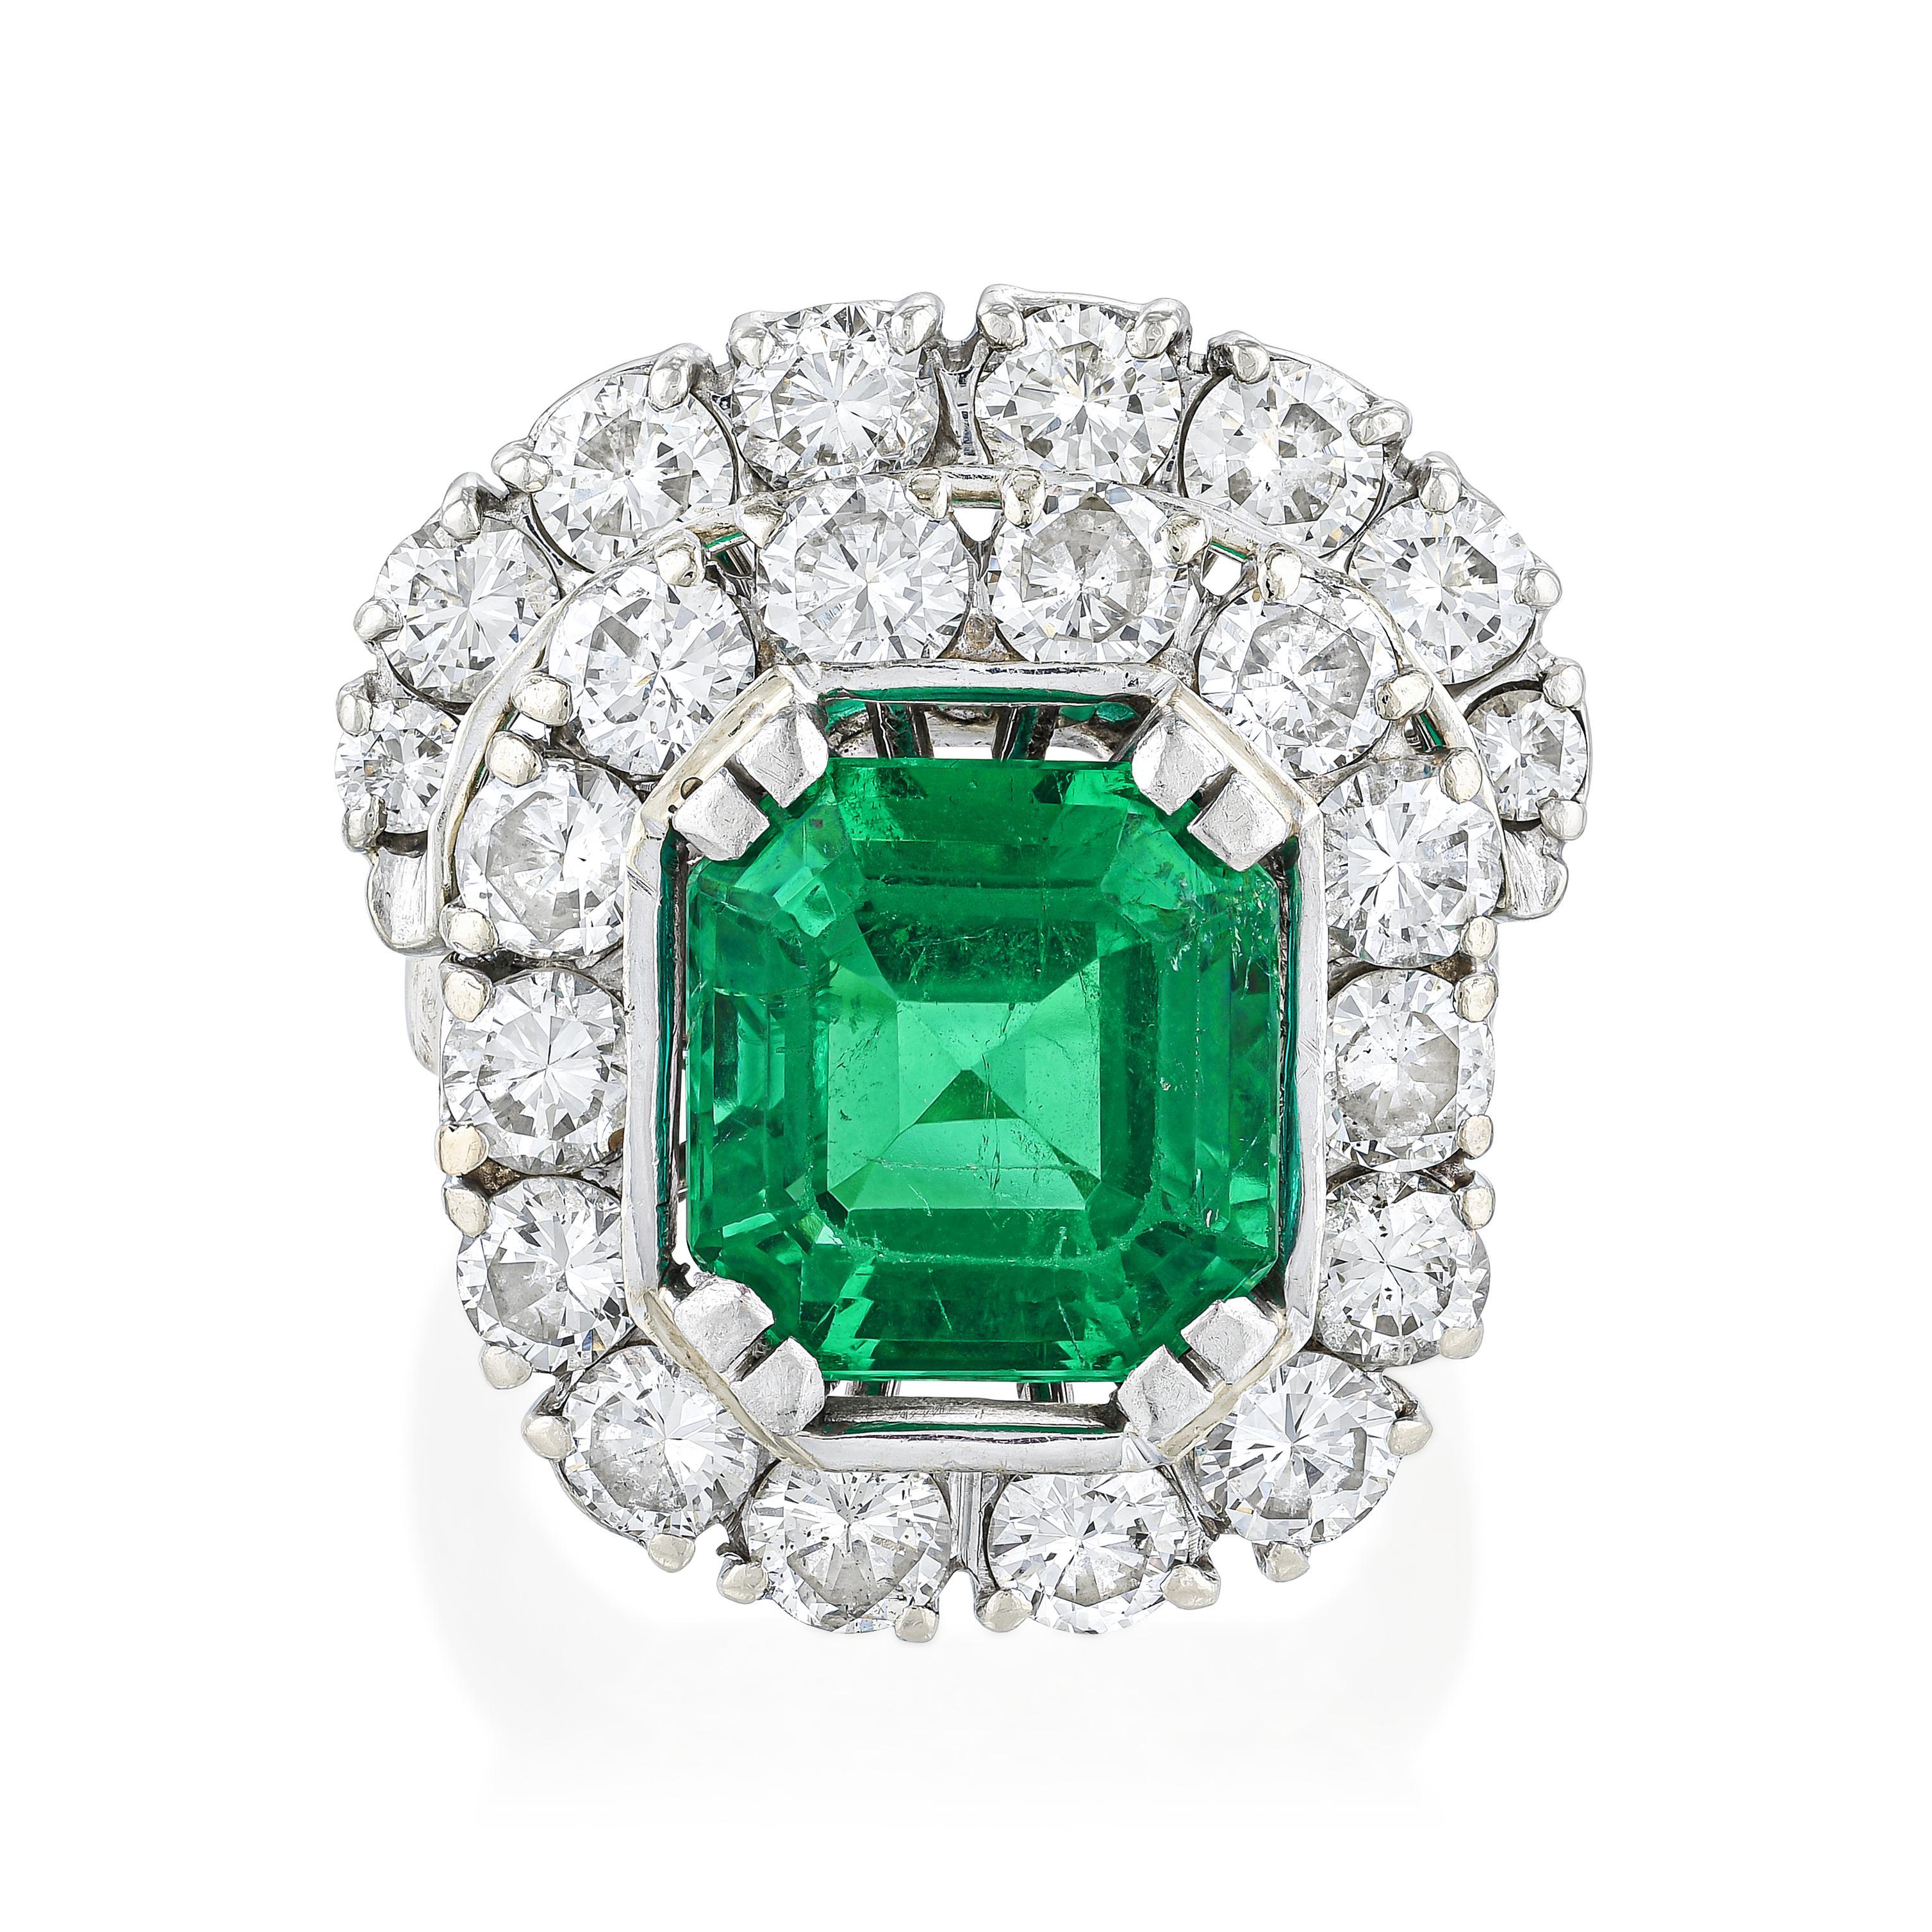 COLOMBIAN EMERALD AND DIAMOND RING 30bcf0